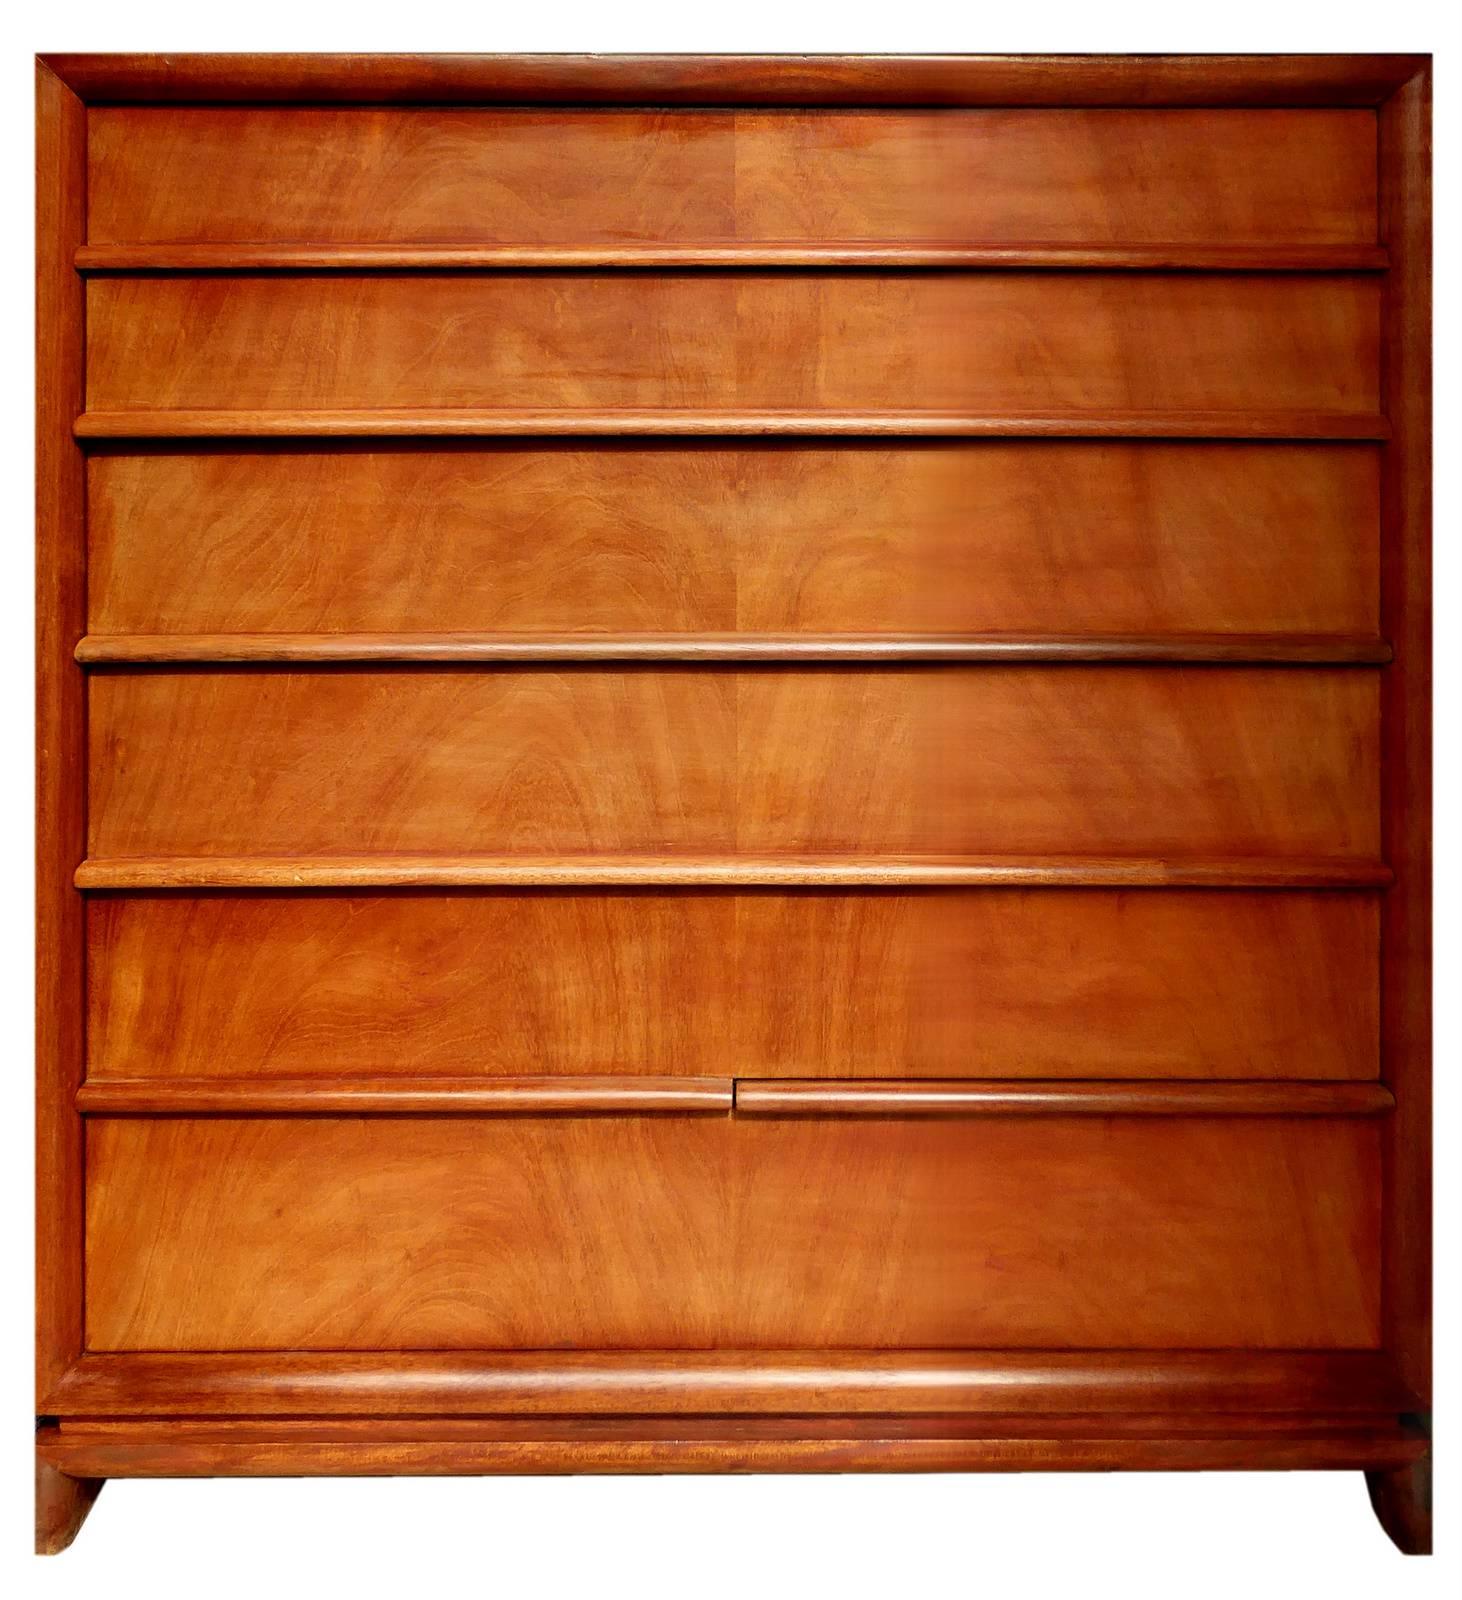 Bleached walnut creates the stunning grain and color of this beautifully constructed chest with sophisticated design features like divided drawer pulls and bracket feet.

We have the matching nightstands. Just ask.

A few important notes about all